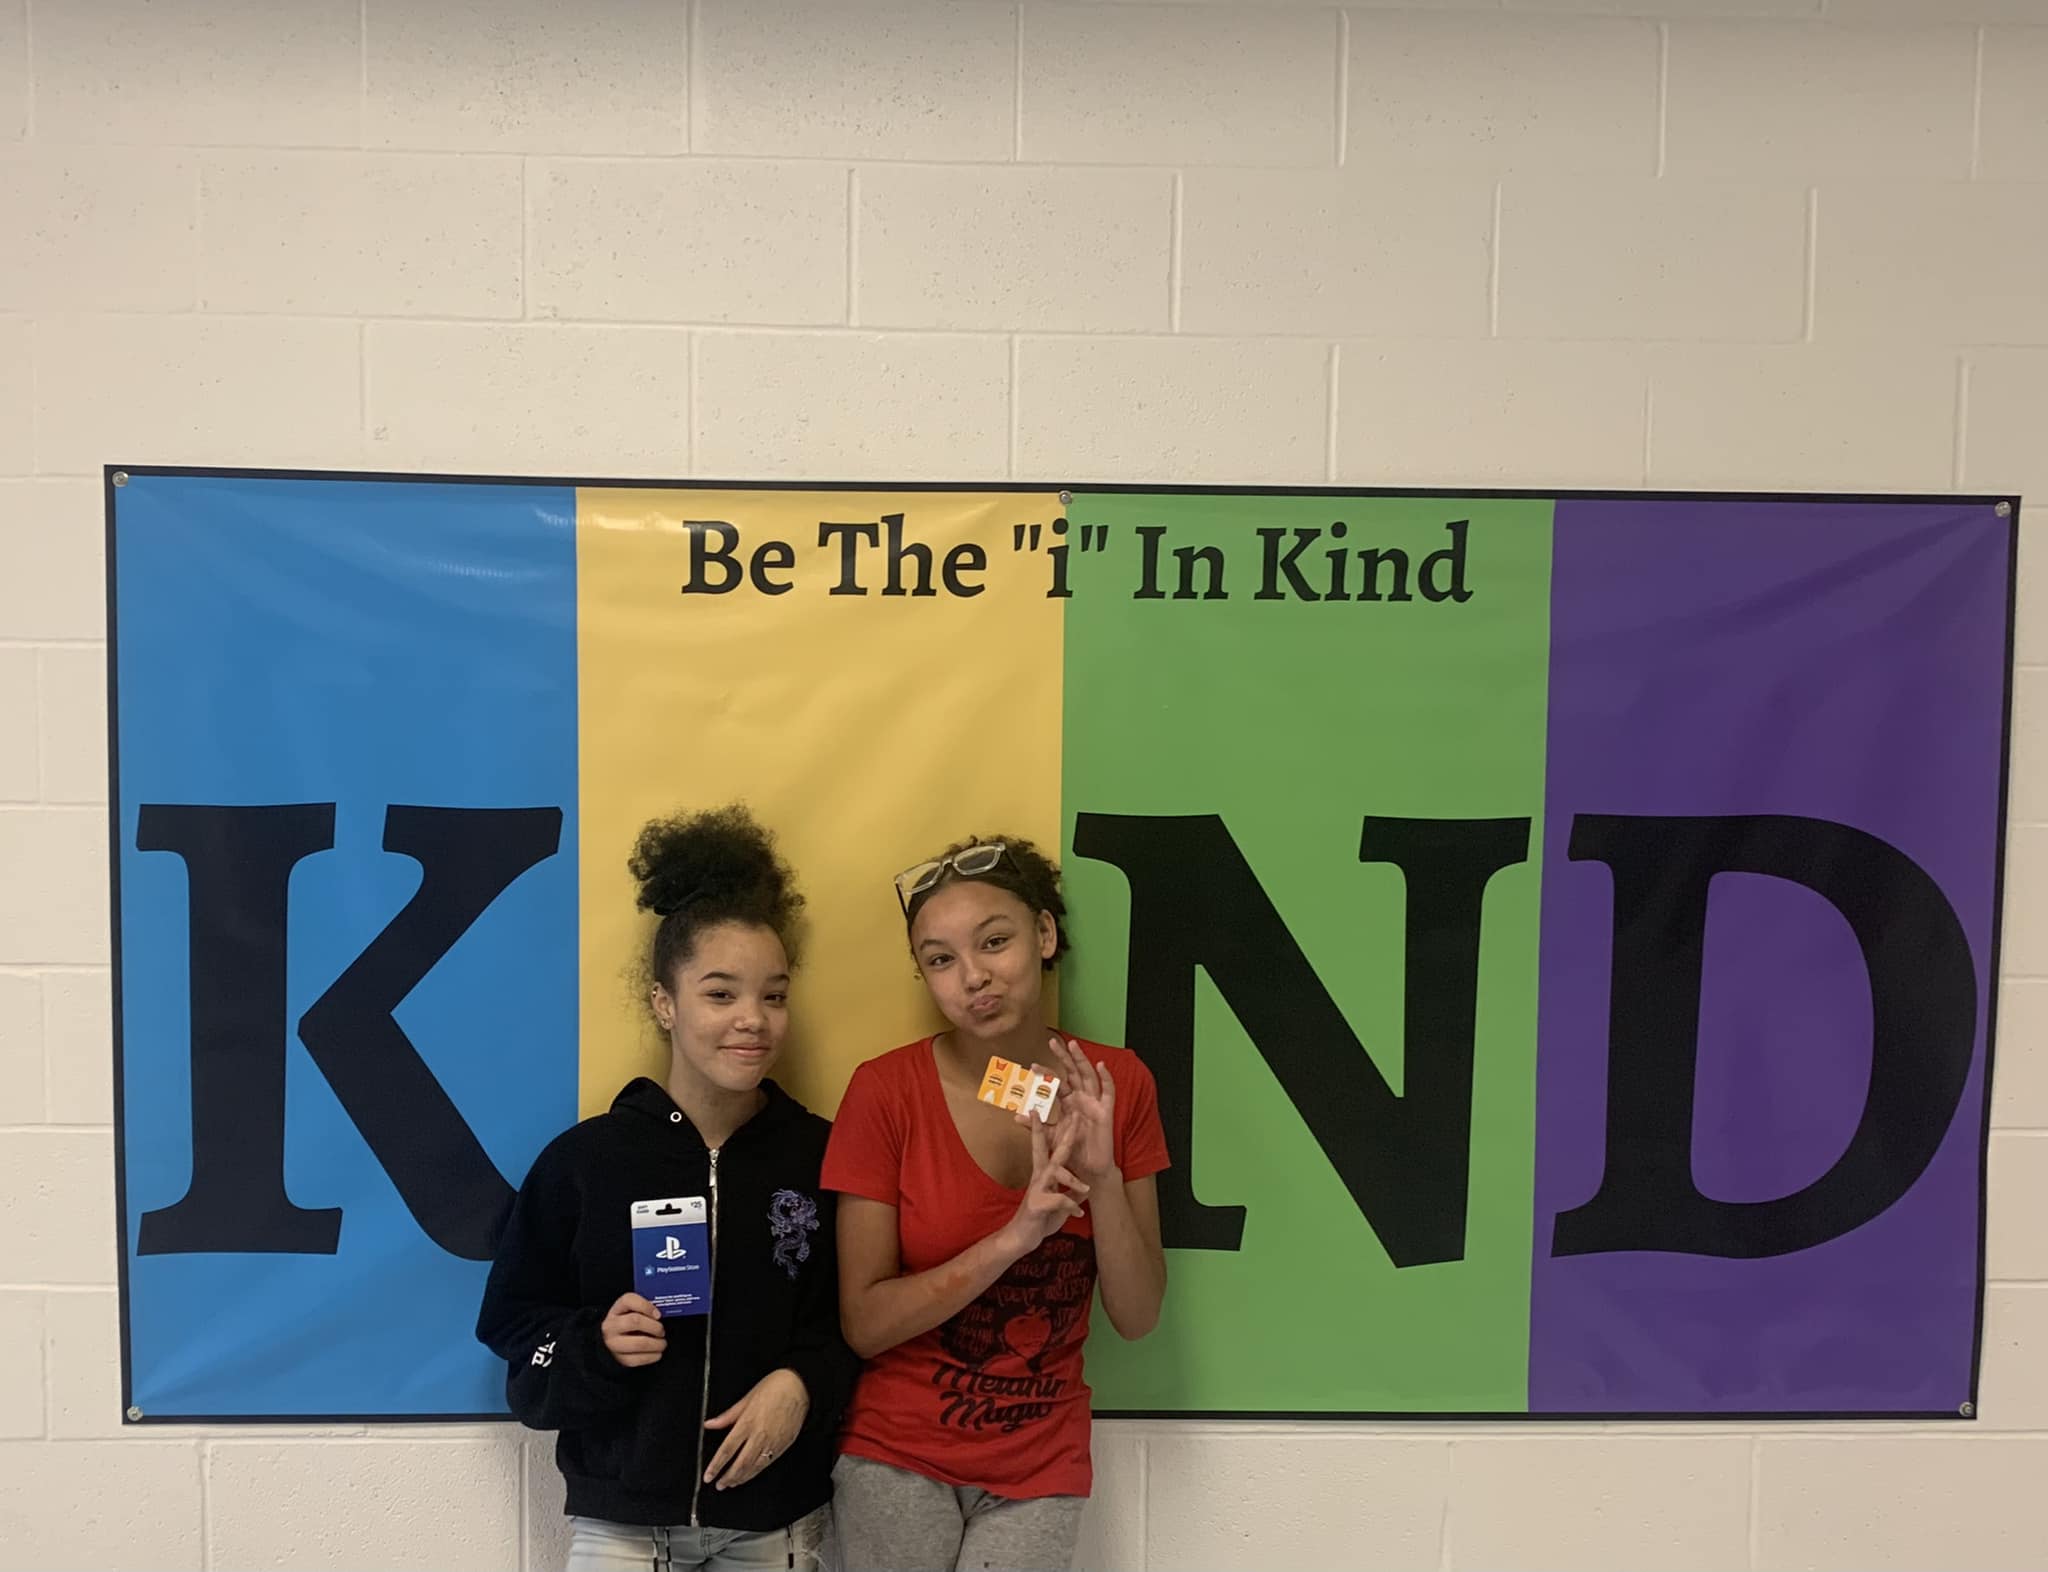 Be The 'i' in Kind poster with two girls standing in front of it